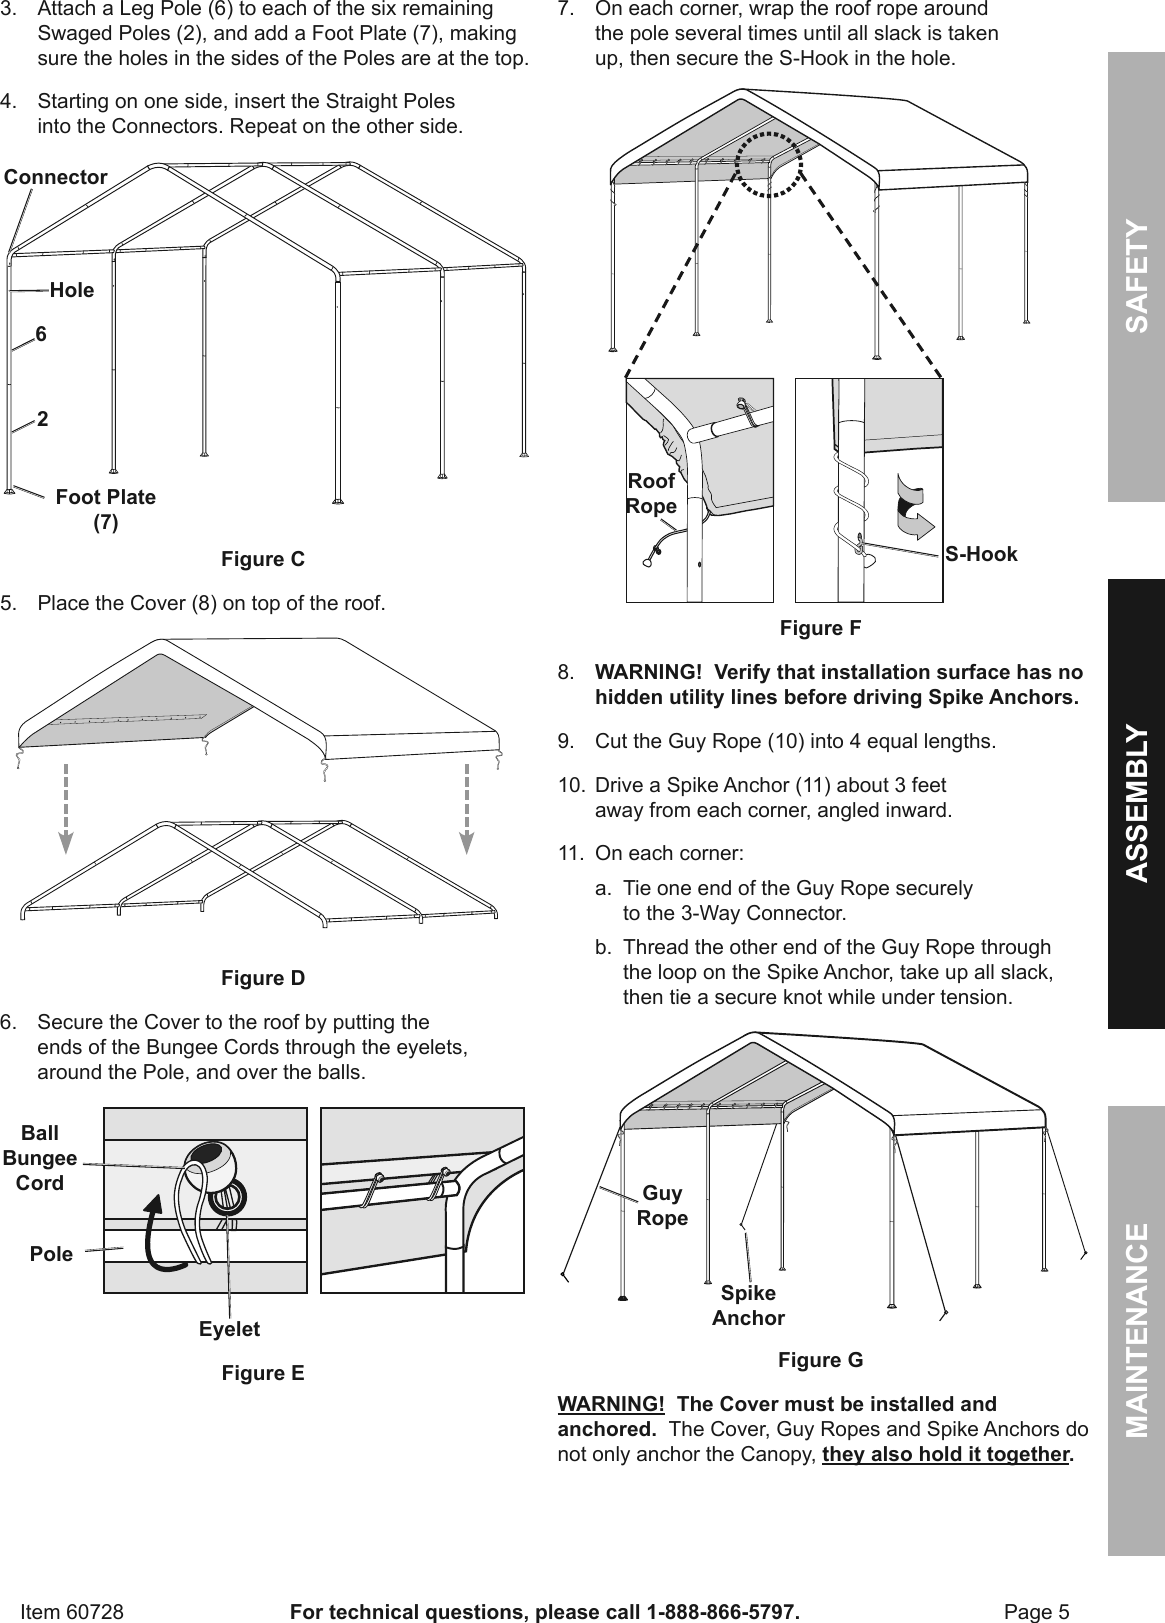 Page 5 of 8 - Harbor-Freight Harbor-Freight-10-Ft-X-20-Ft-Portable-Car-Canopy-Product-Manual-  Harbor-freight-10-ft-x-20-ft-portable-car-canopy-product-manual